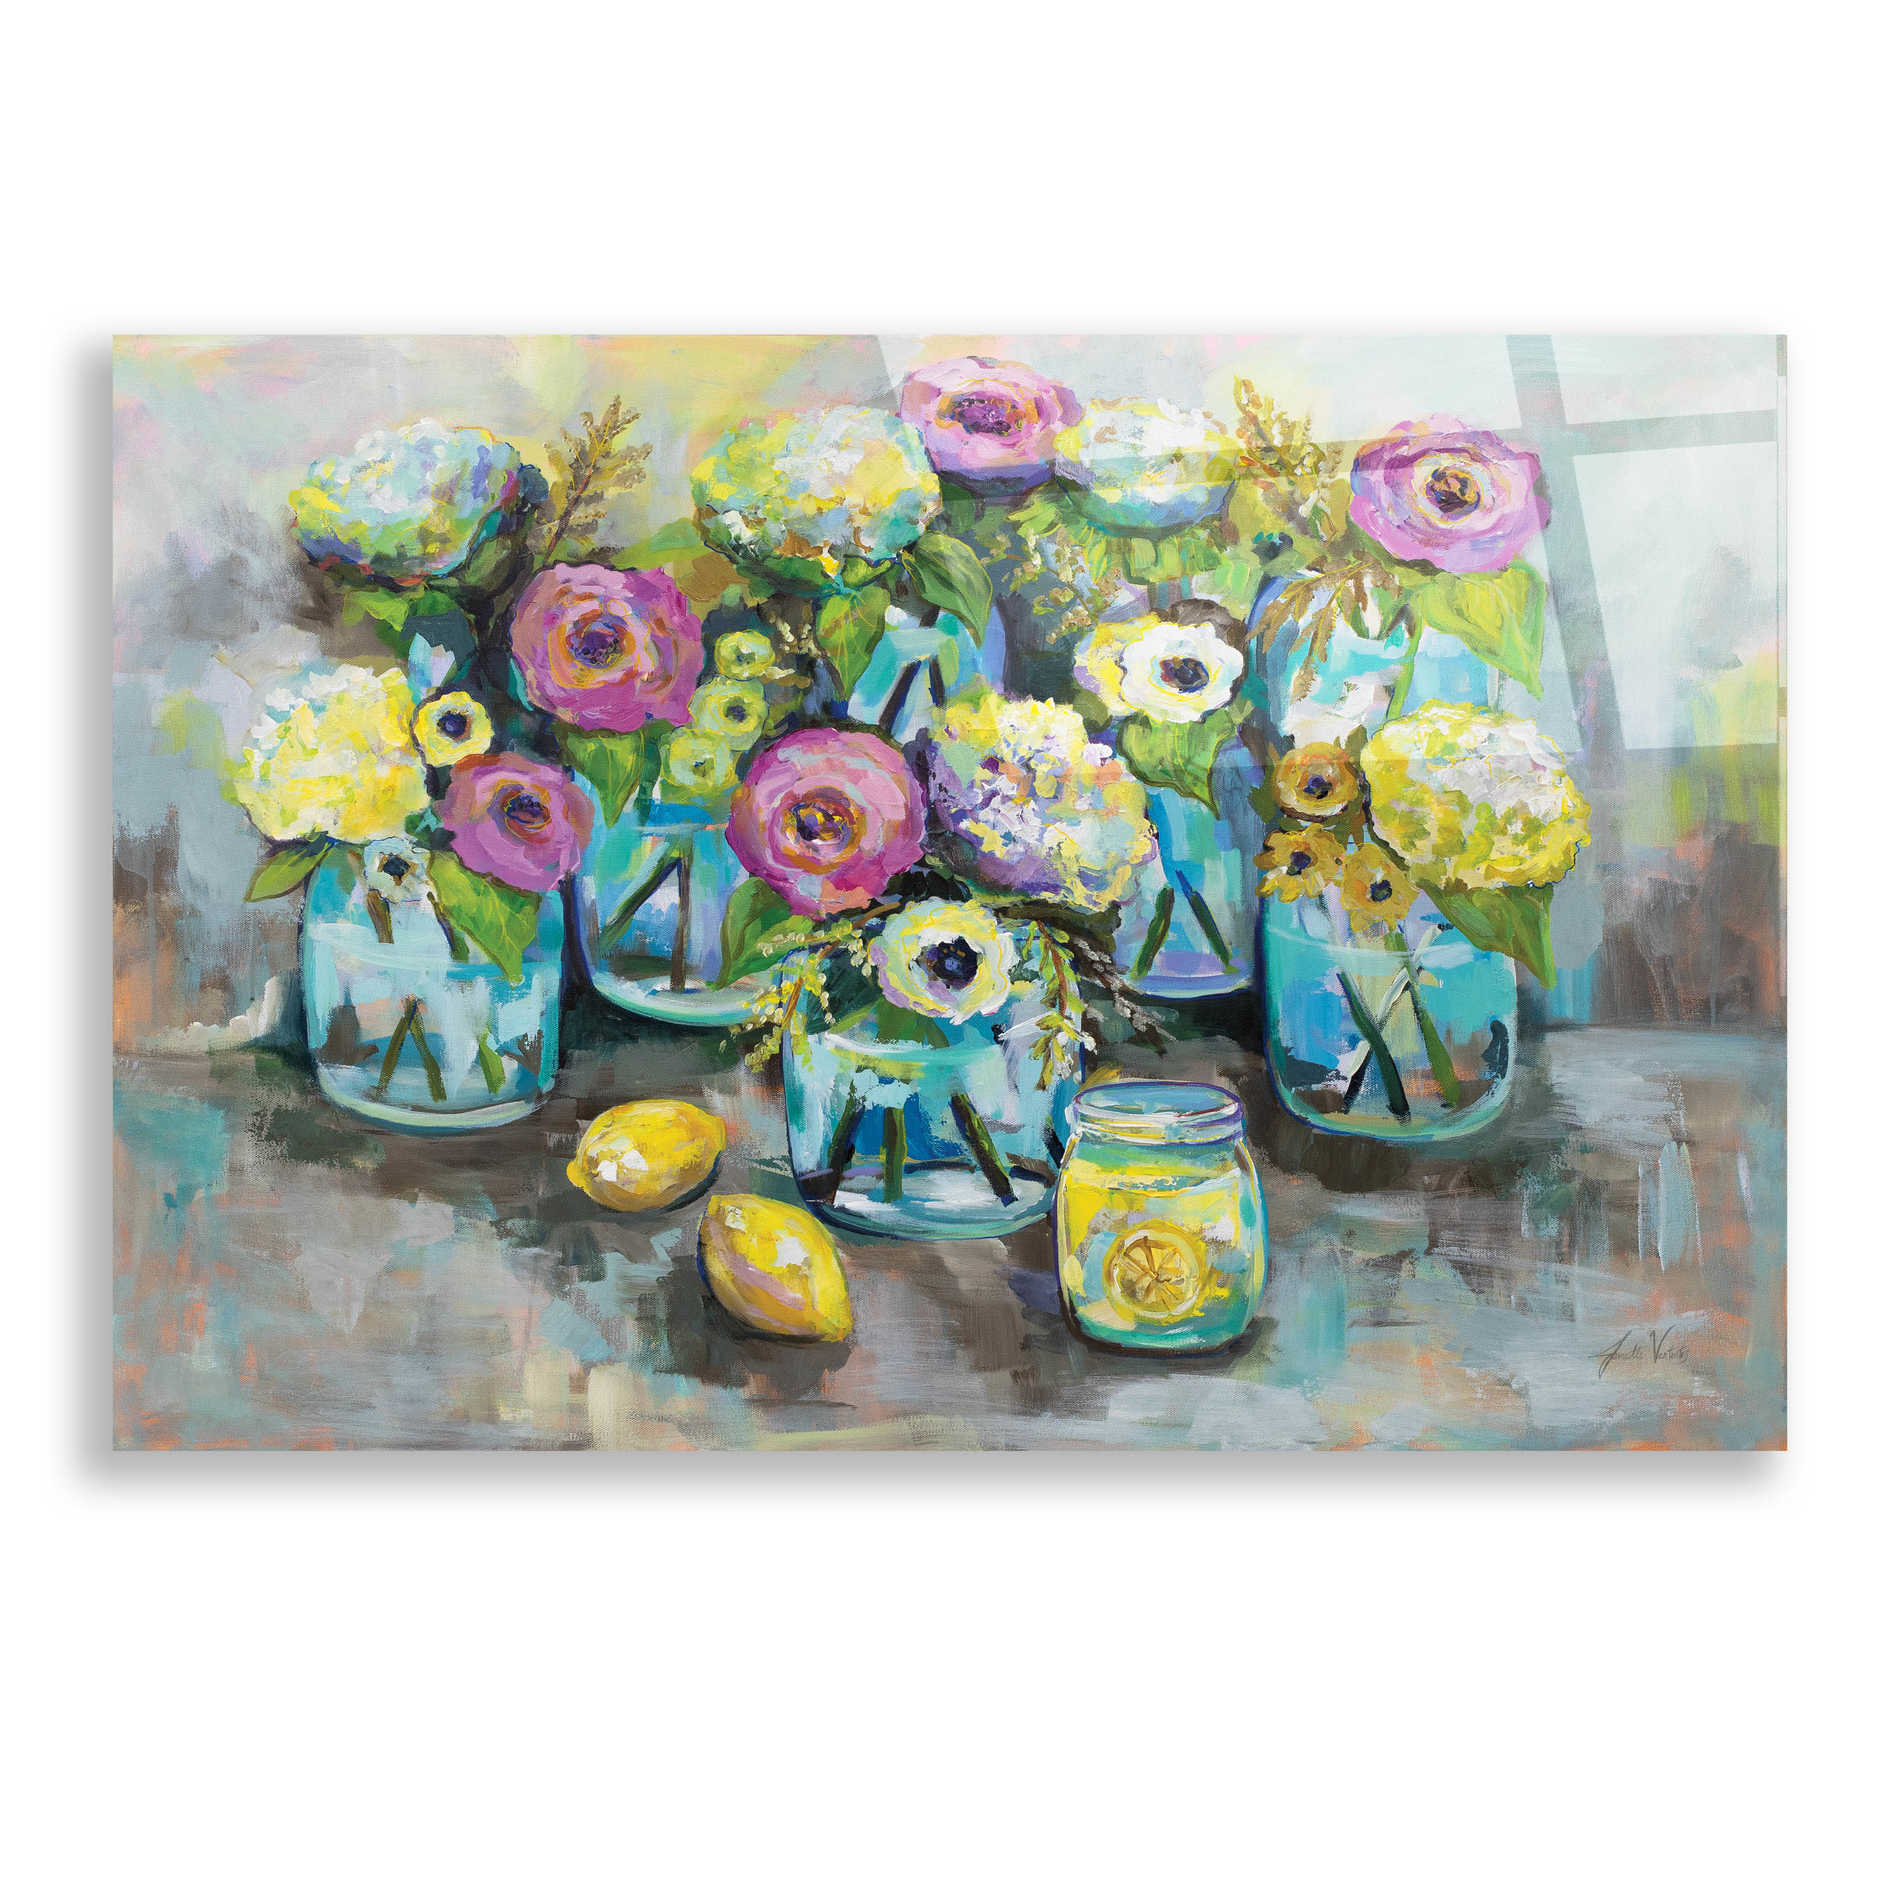 Epic Art 'When Life Gives You Lemons' by Jeanette Vertentes, Acrylic Glass Wall Art,24x16